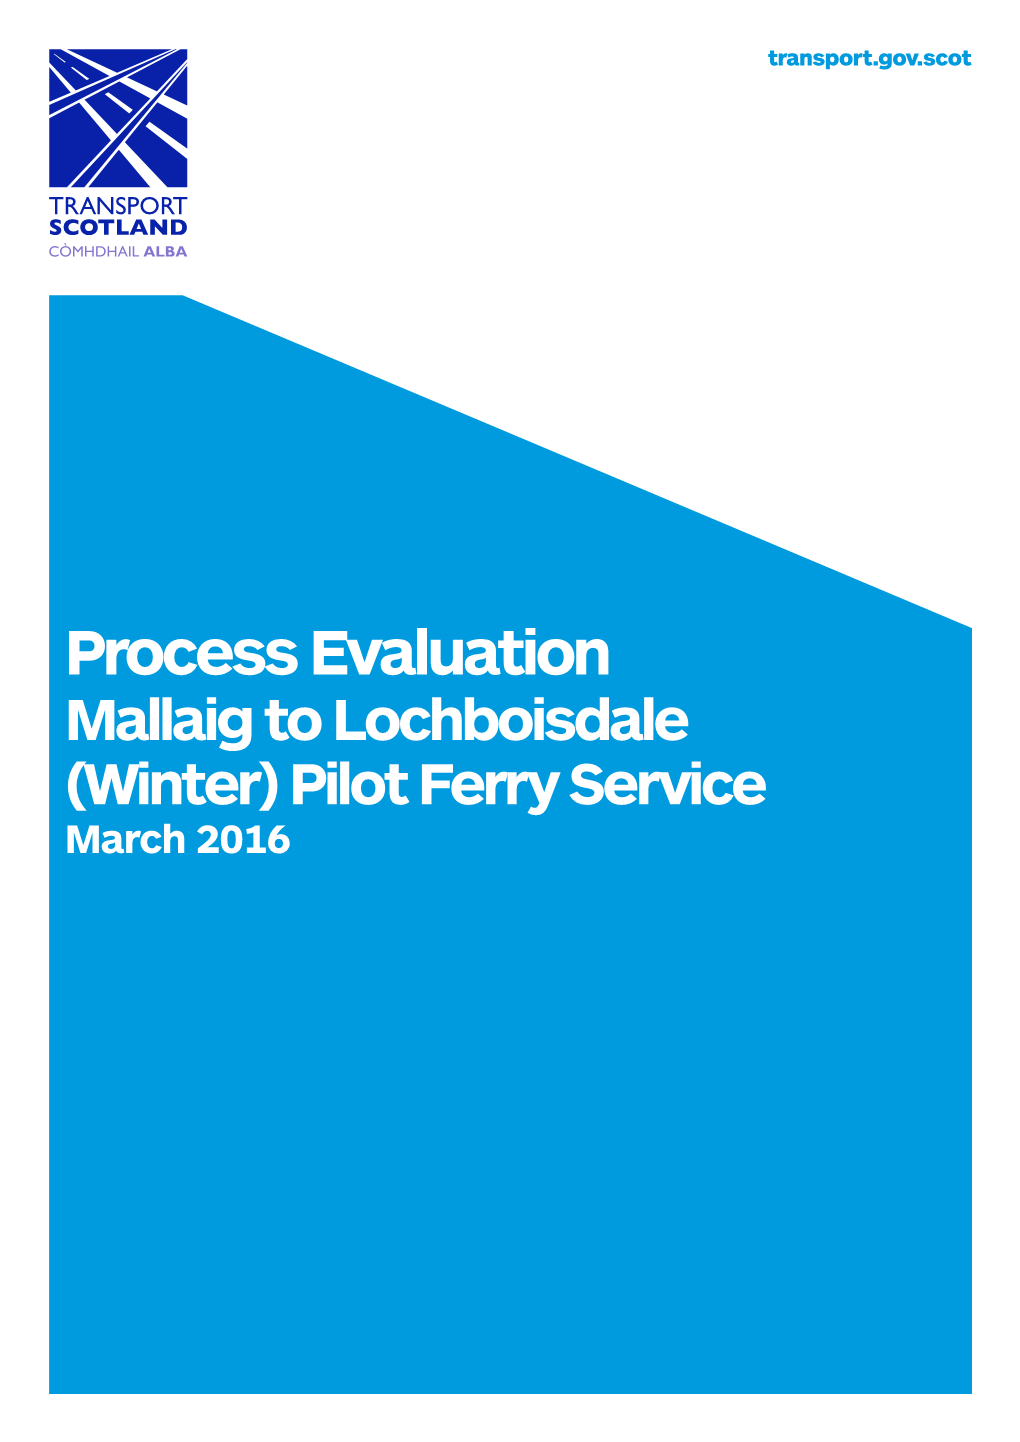 Mallaig to Lochboisdale (Winter) Pilot Ferry Service March 2016 Process Evaluation of the Mallaig to Lochboisdale (Winter) Pilot Ferry Service TRANSPORT SCOTLAND